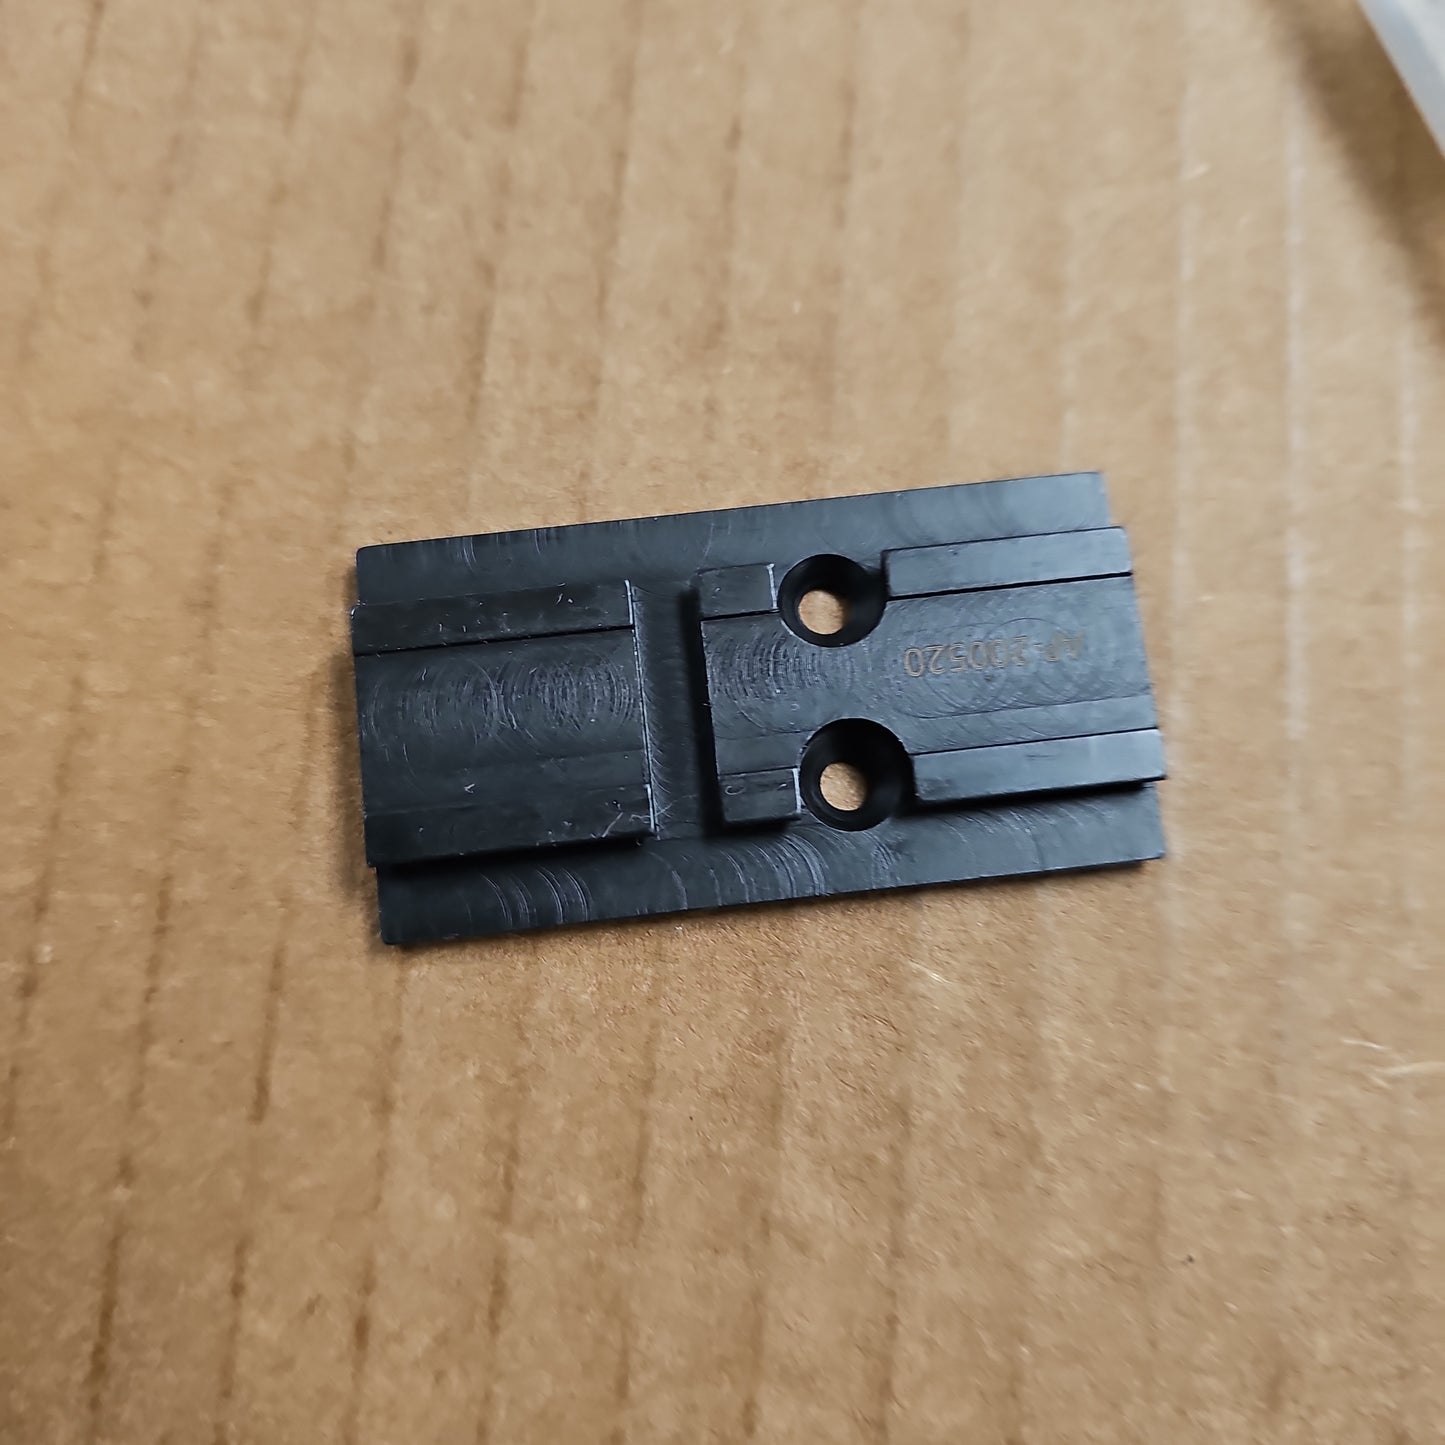 Mount: ACRO P-1 Plate for Glock MOS 200520